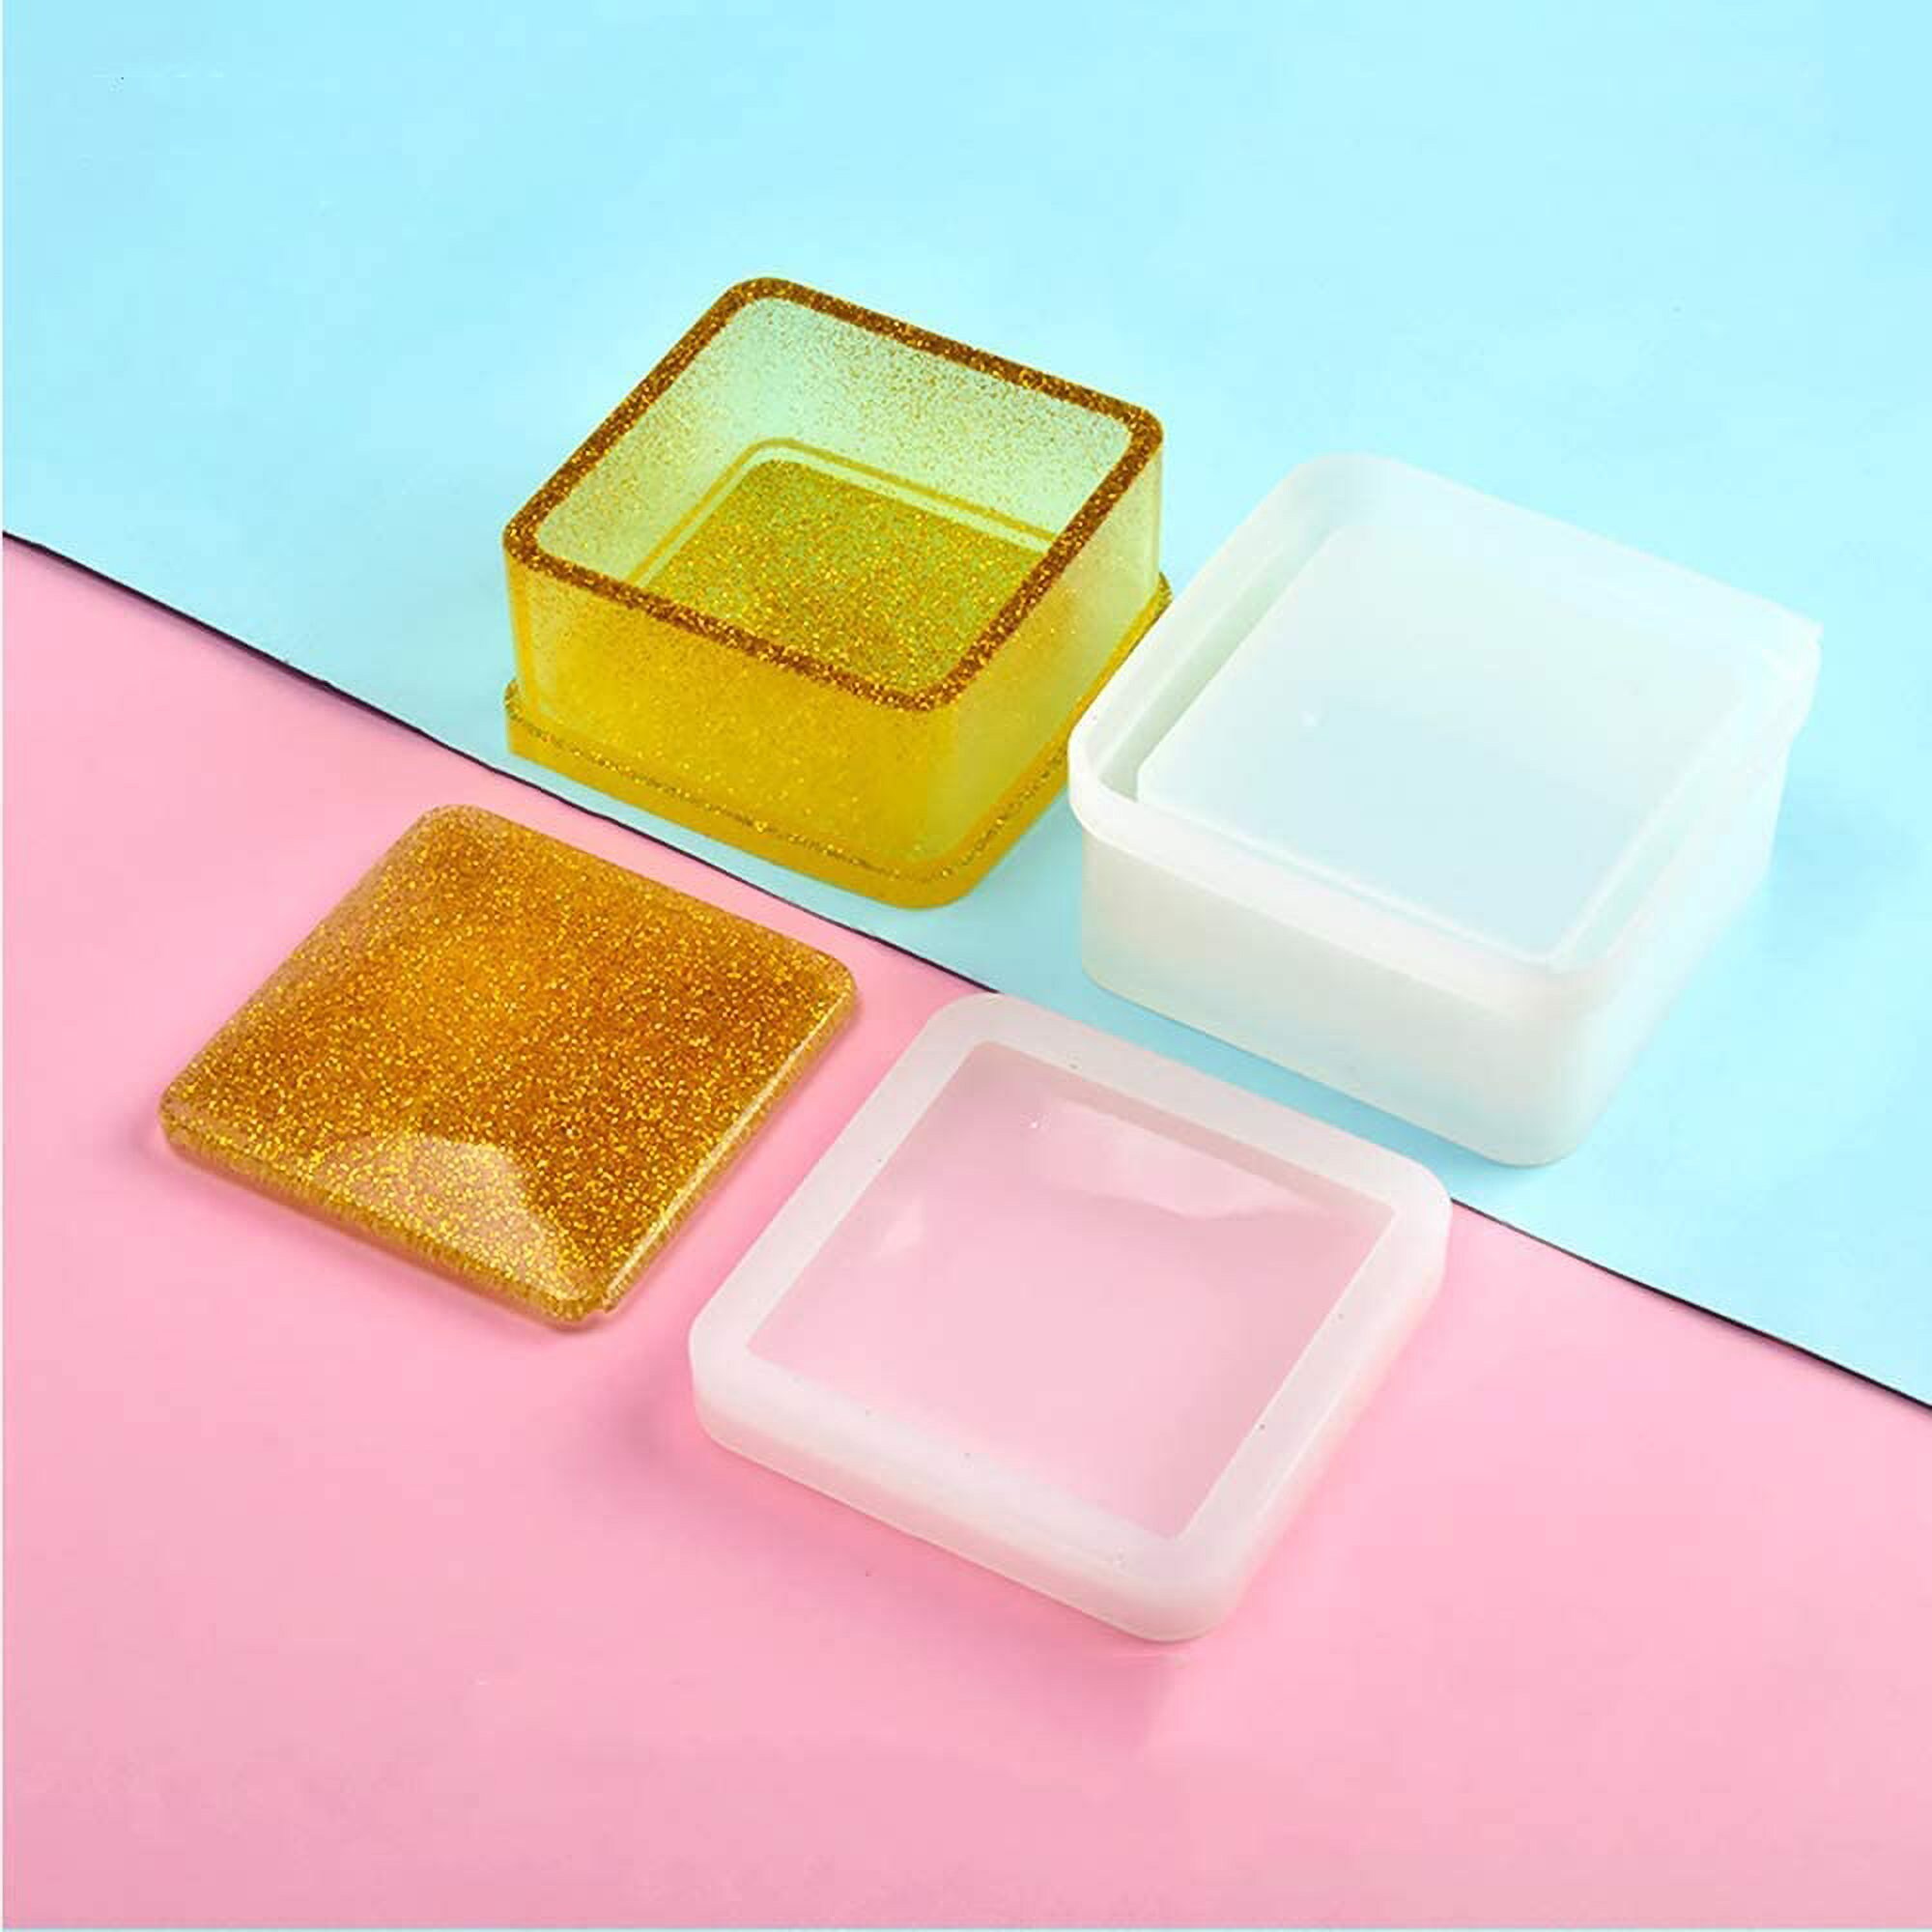 3pcs Box Resin Molds, EEEkit Silicone Resin Molds with Lid, Jewelry Box  Molds with Heart Shape Silicone Resin Mold, Hexagon Storage Box Mold and